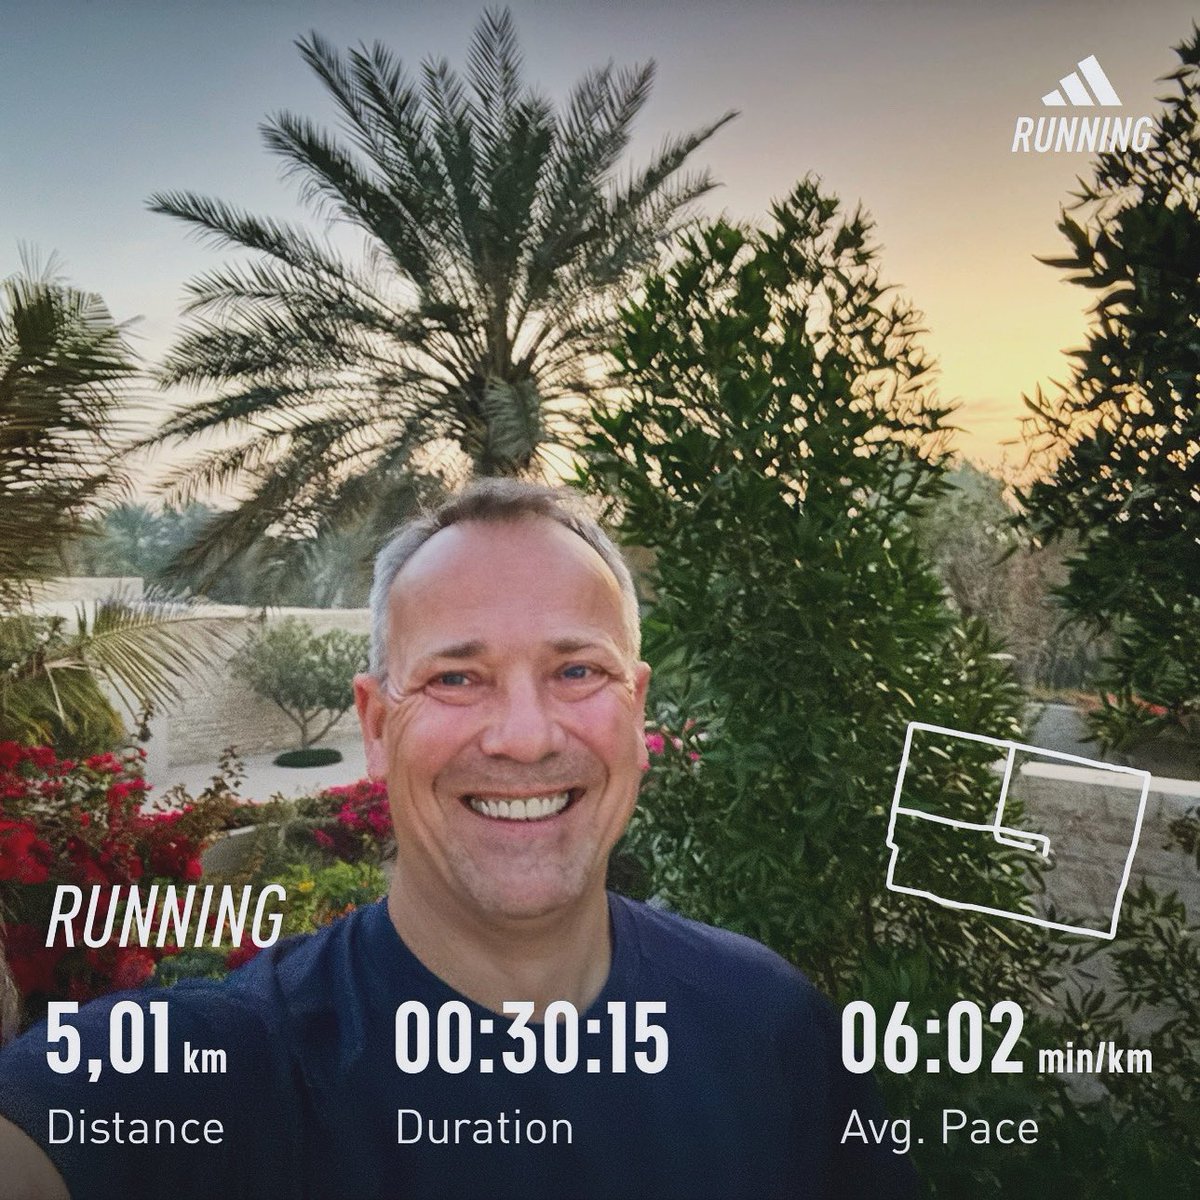 #thursday #morning #run 🏃🏽 #iamready 👍 #letsthedaybegin 😃 and have #fun 🤩 #keepgoing and #stayfit 💪😃🙌🙋‍♂️